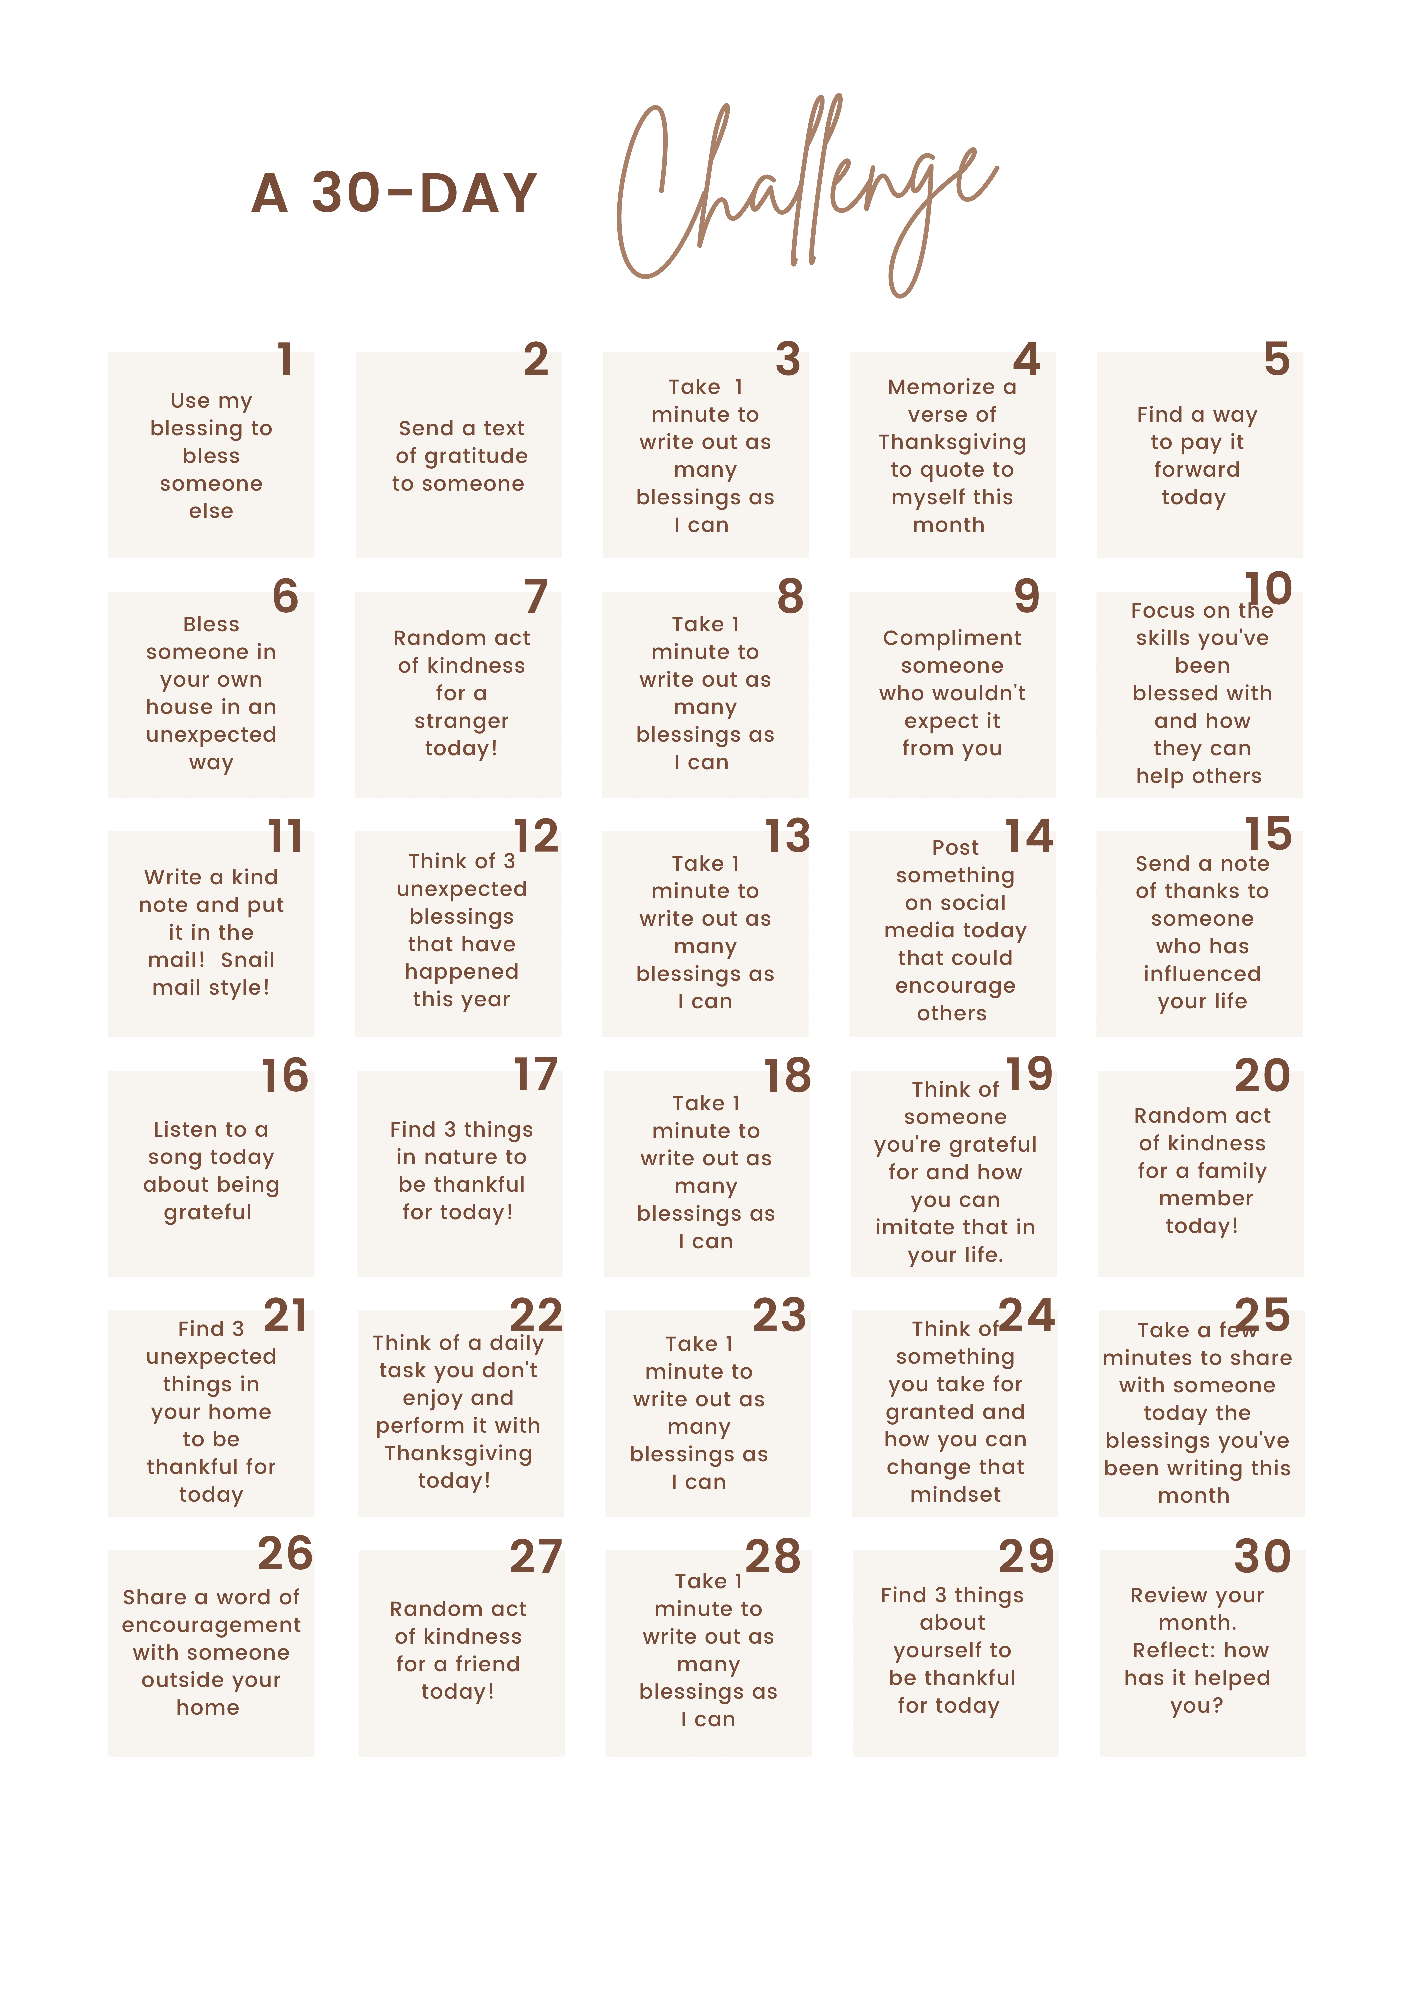 layout of 30 daily challenges for the month of November